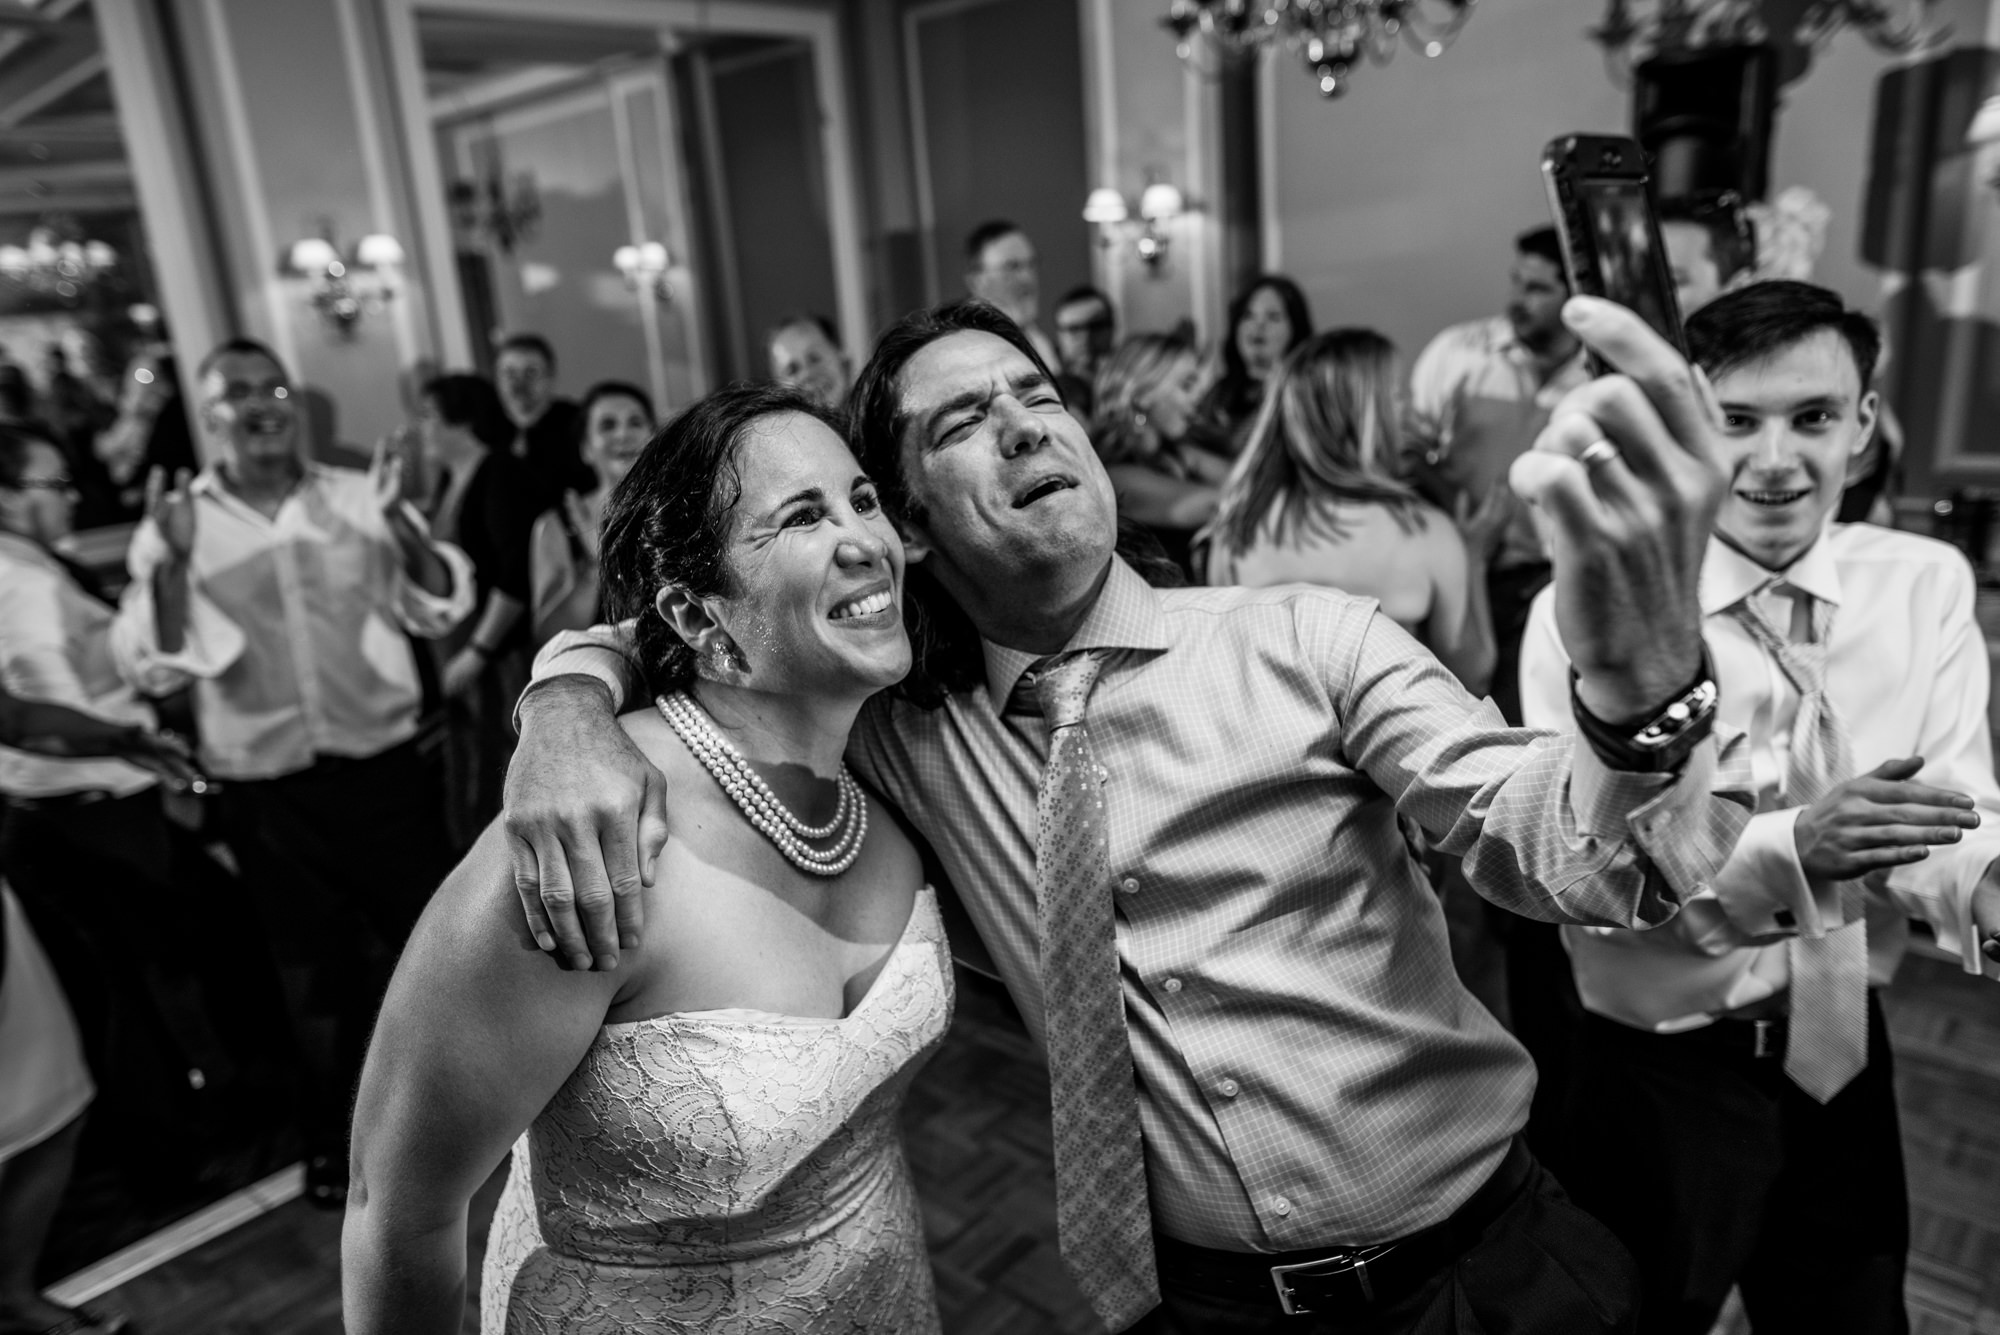 The happy couple dance into the night with their wedding guests at the Seattle Tennis Club, summer 2016. Photo by Seattle Wedding Photographers Jennifer Tai Photo Artistry.